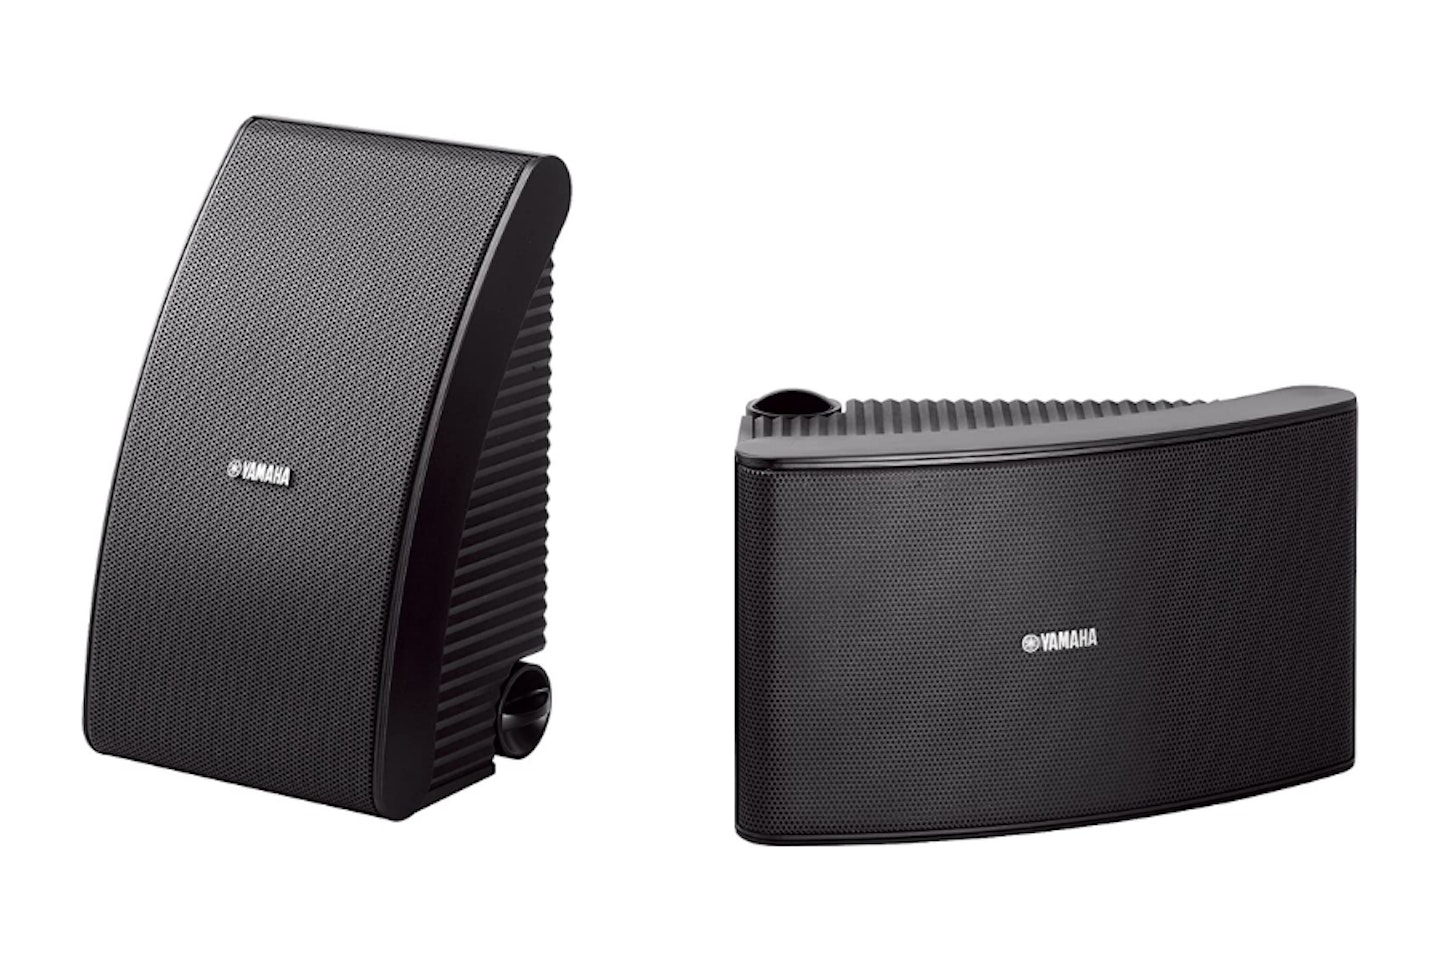 Yamaha NSAW592 All Weather Speakers - one of the best speakers for music